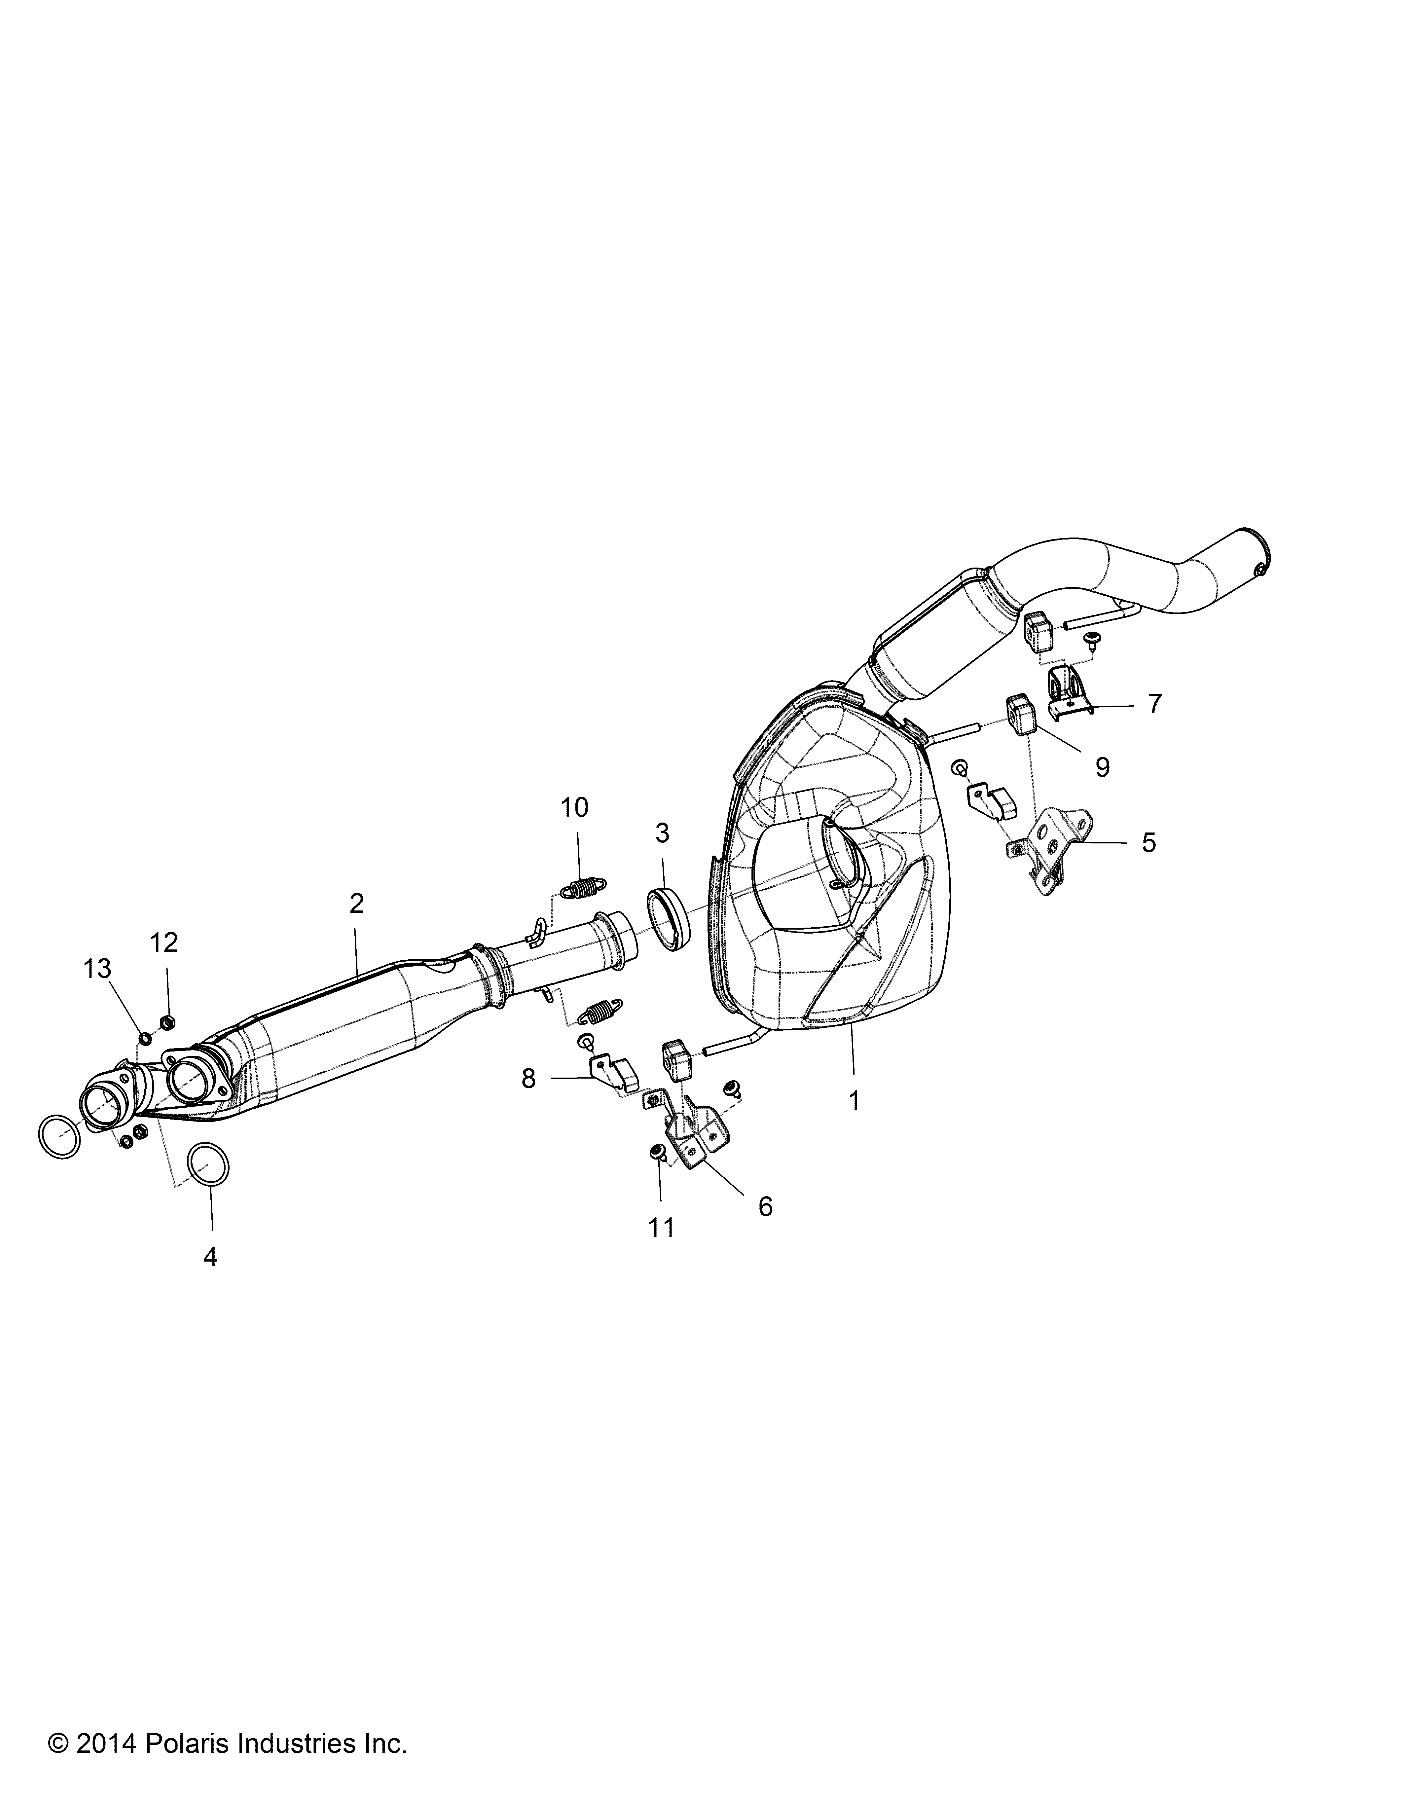 Part Number : 7044452 SPRING-EXHAUST  SS